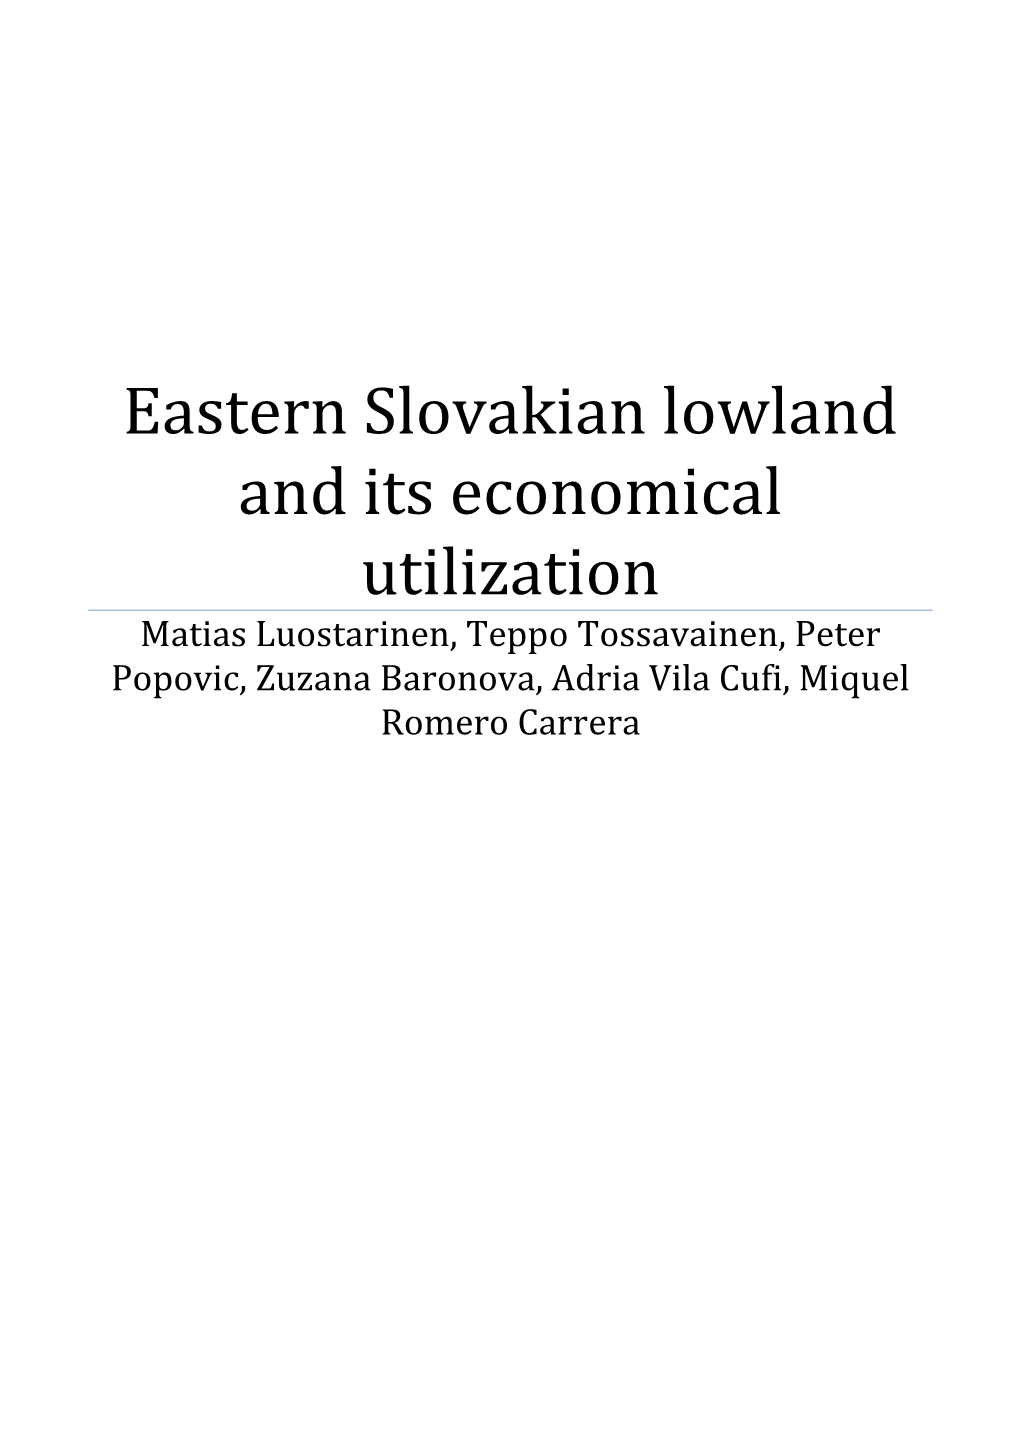 East Slovakian Lowland and Its Economical Utilization